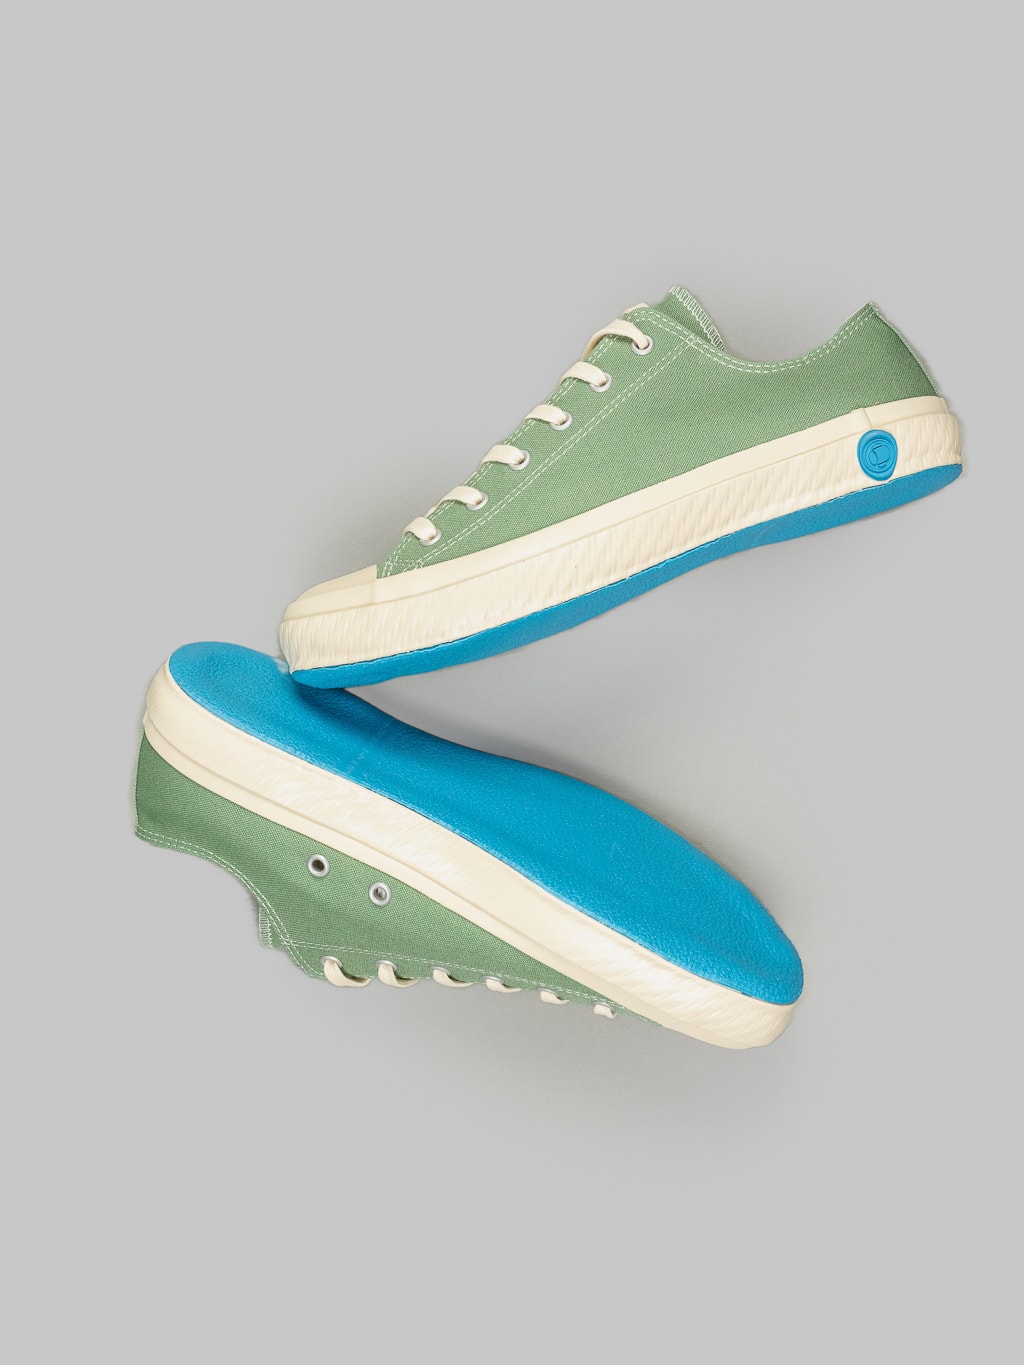 Shoes like pottery low sneaker green bright blue rubber sole